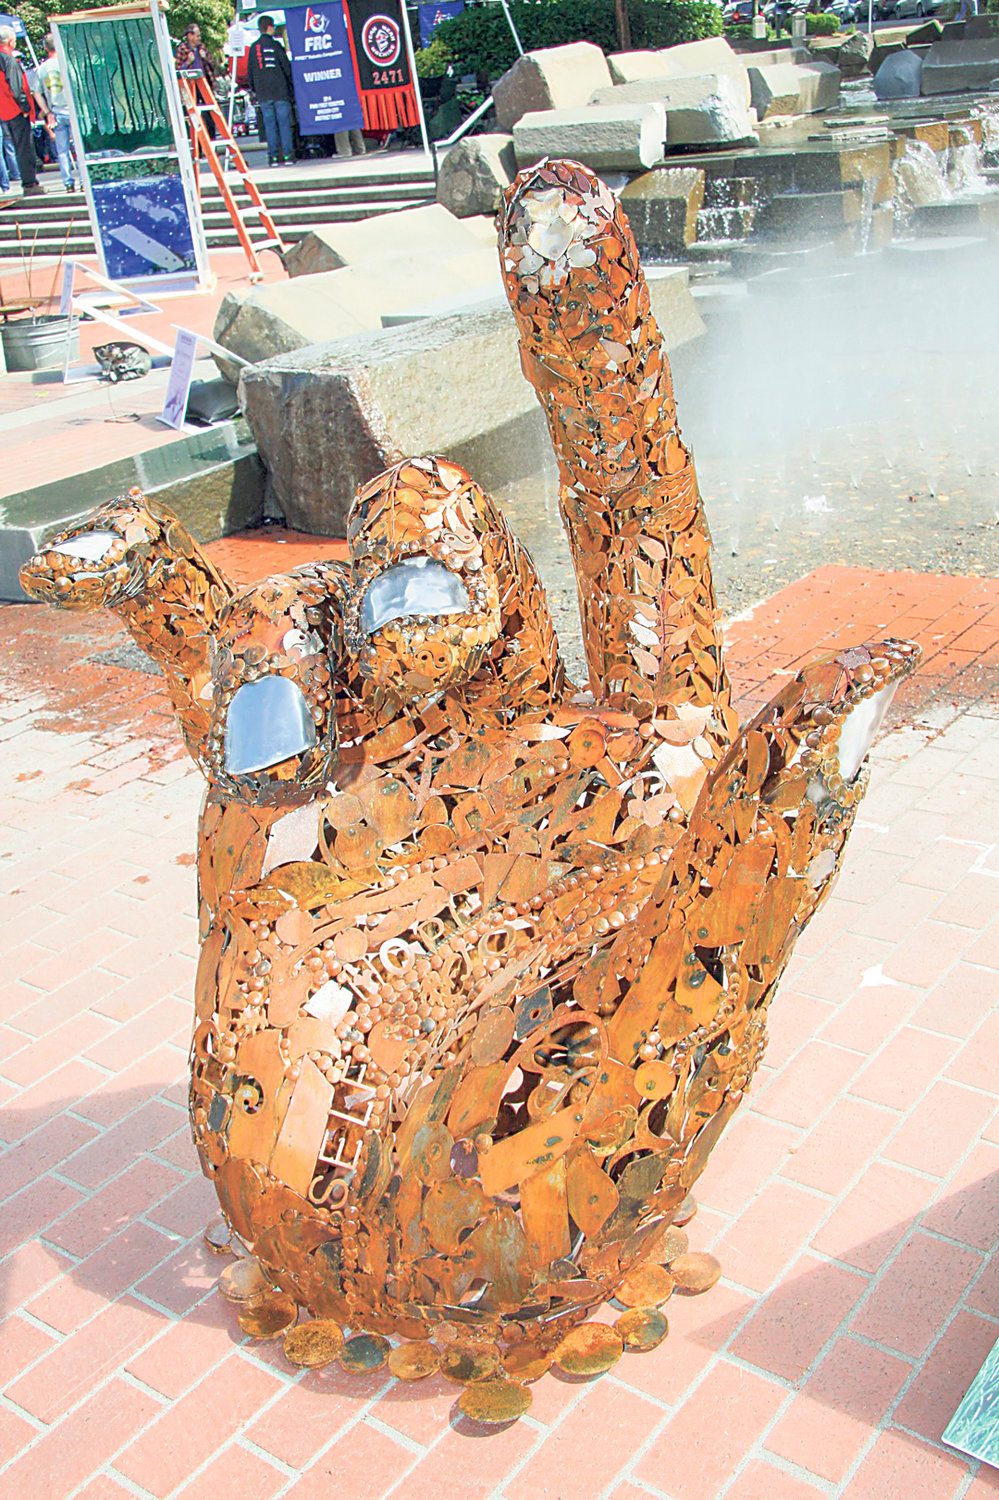 TOM JACKSON of Portland won first place in the Recycled Arts Festival sculpture contest with this entry. Photo courtesy of Clark County Environmental Services